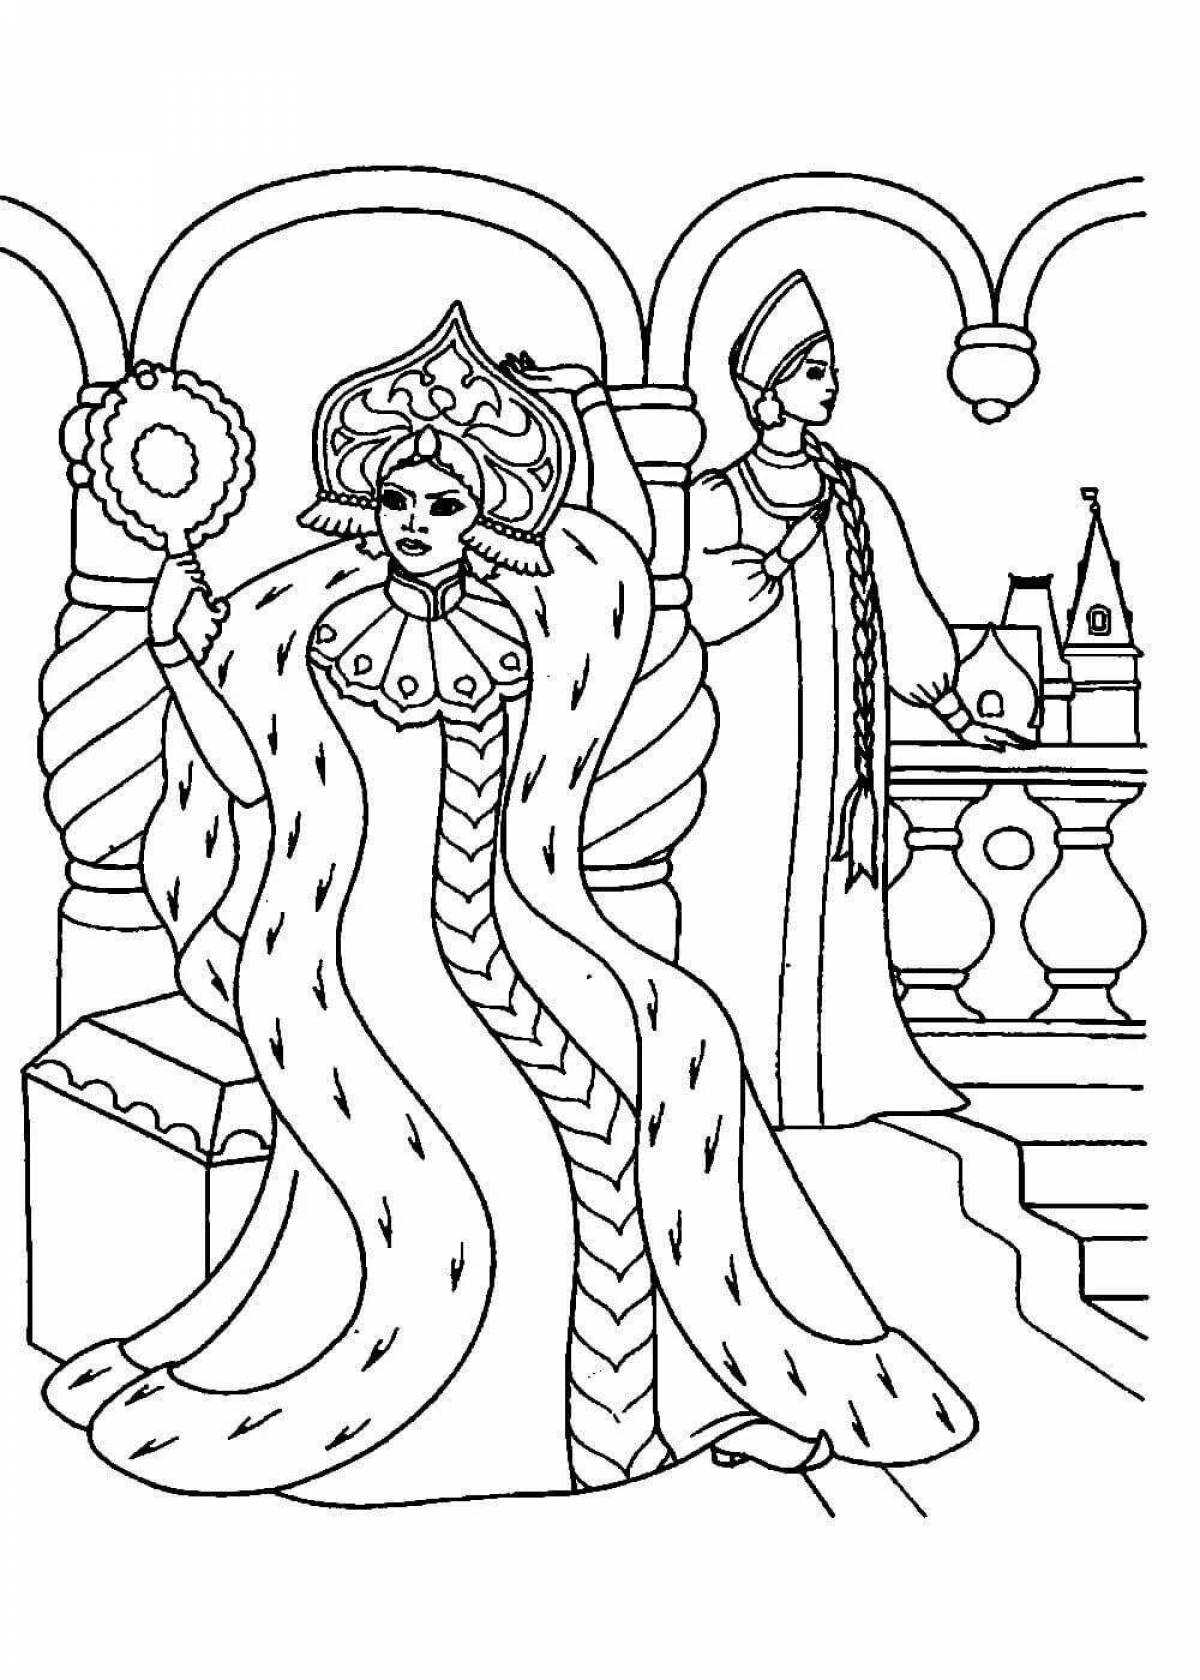 Great coloring book based on Pushkin's fairy tales